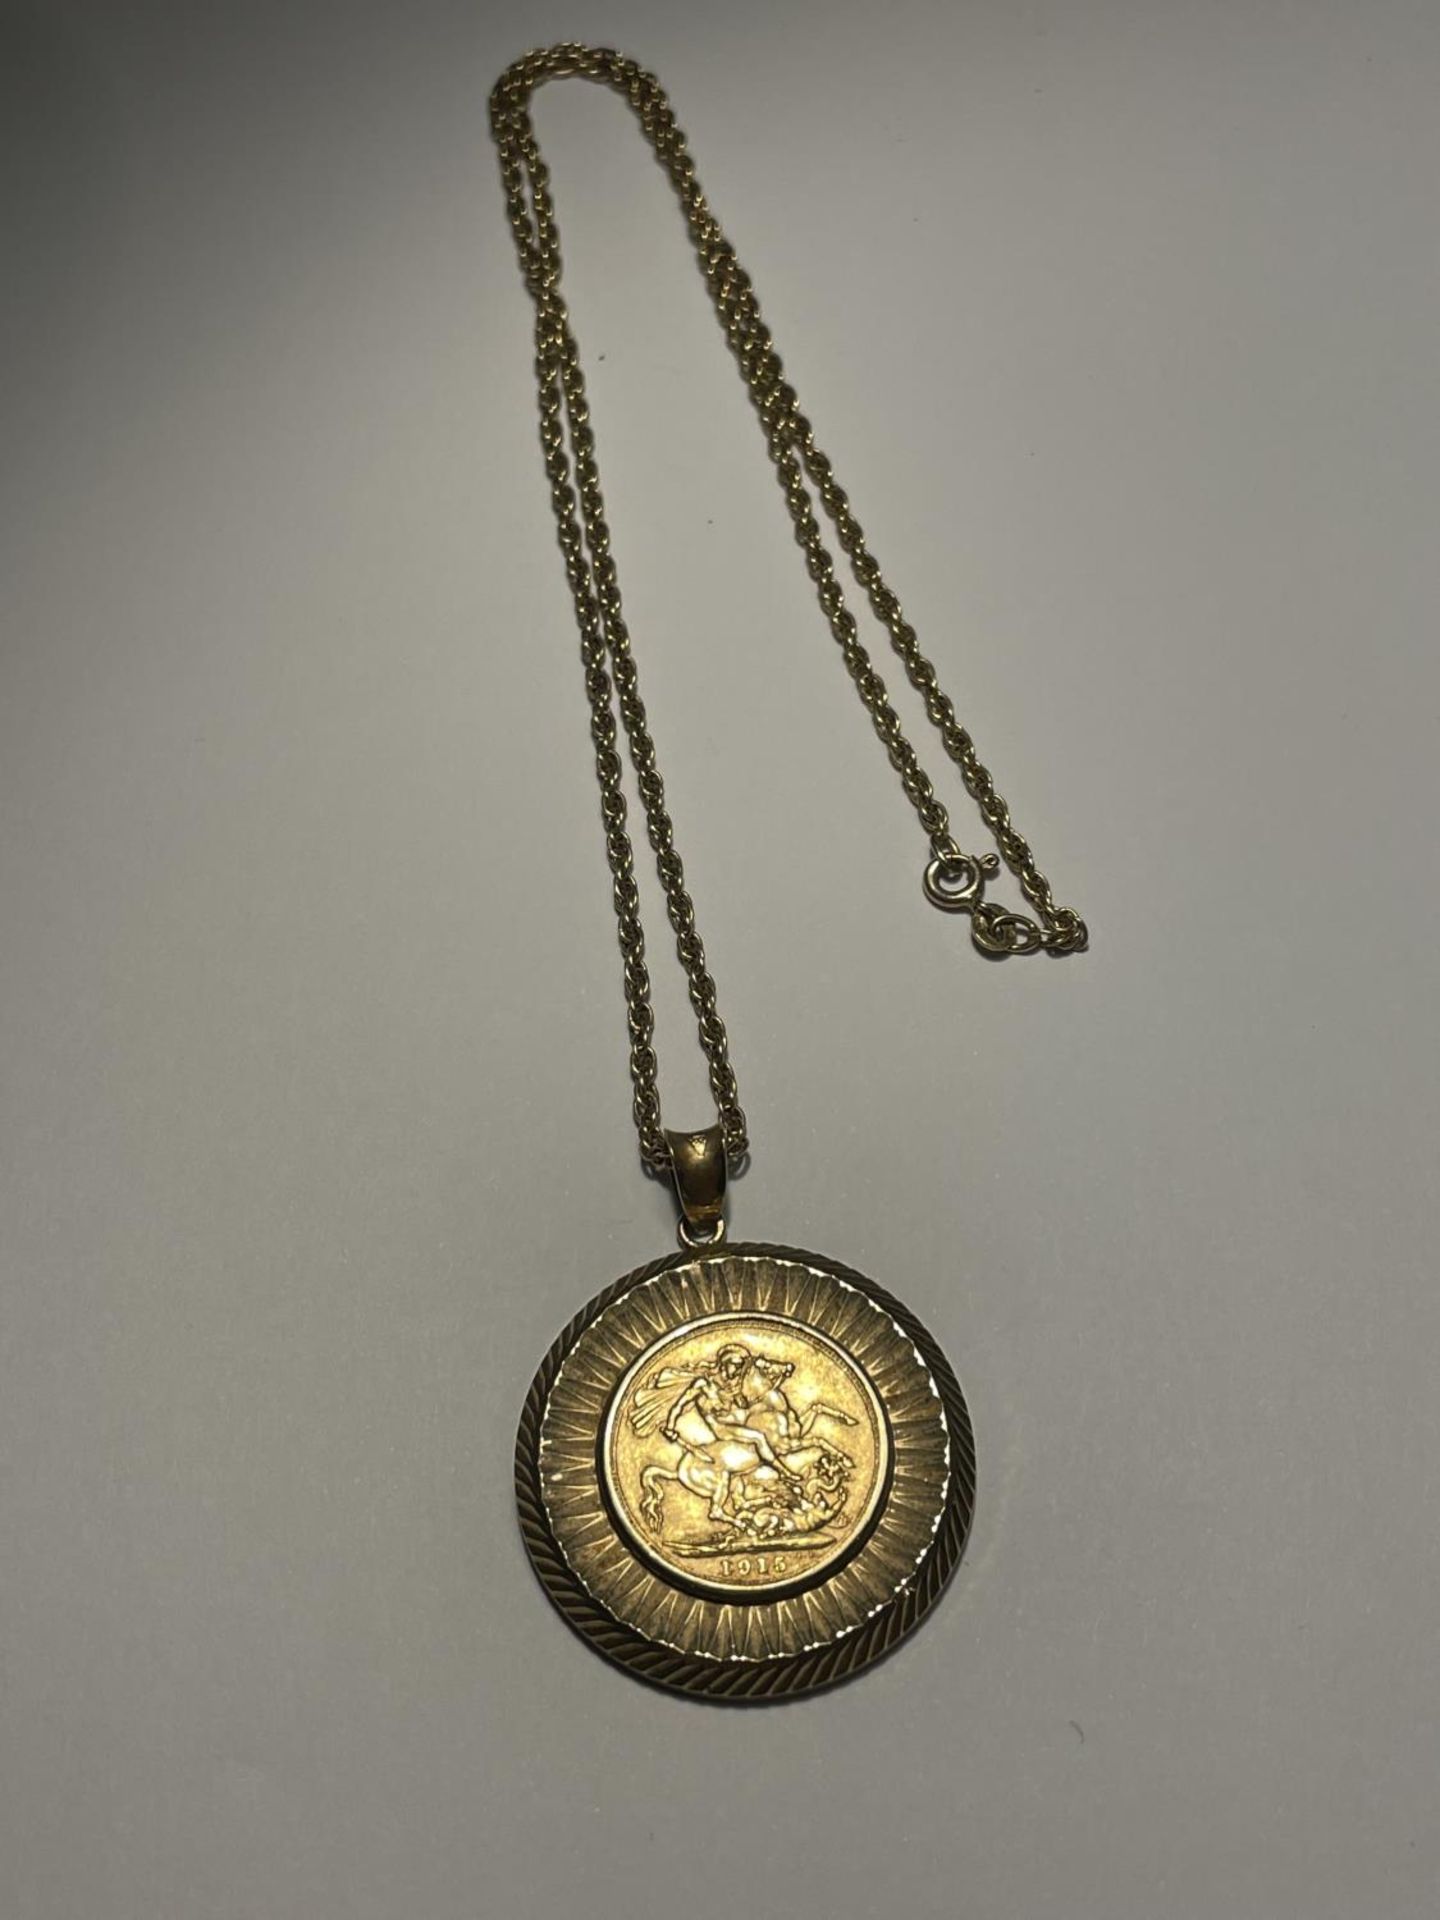 A 1915 GOLD SOVEREIGN IN A 9 CARAT GOLD MOUNT WITH A 9 CARAT GOLD CHAIN GROSS WEIGHT 19.78 GRAMS